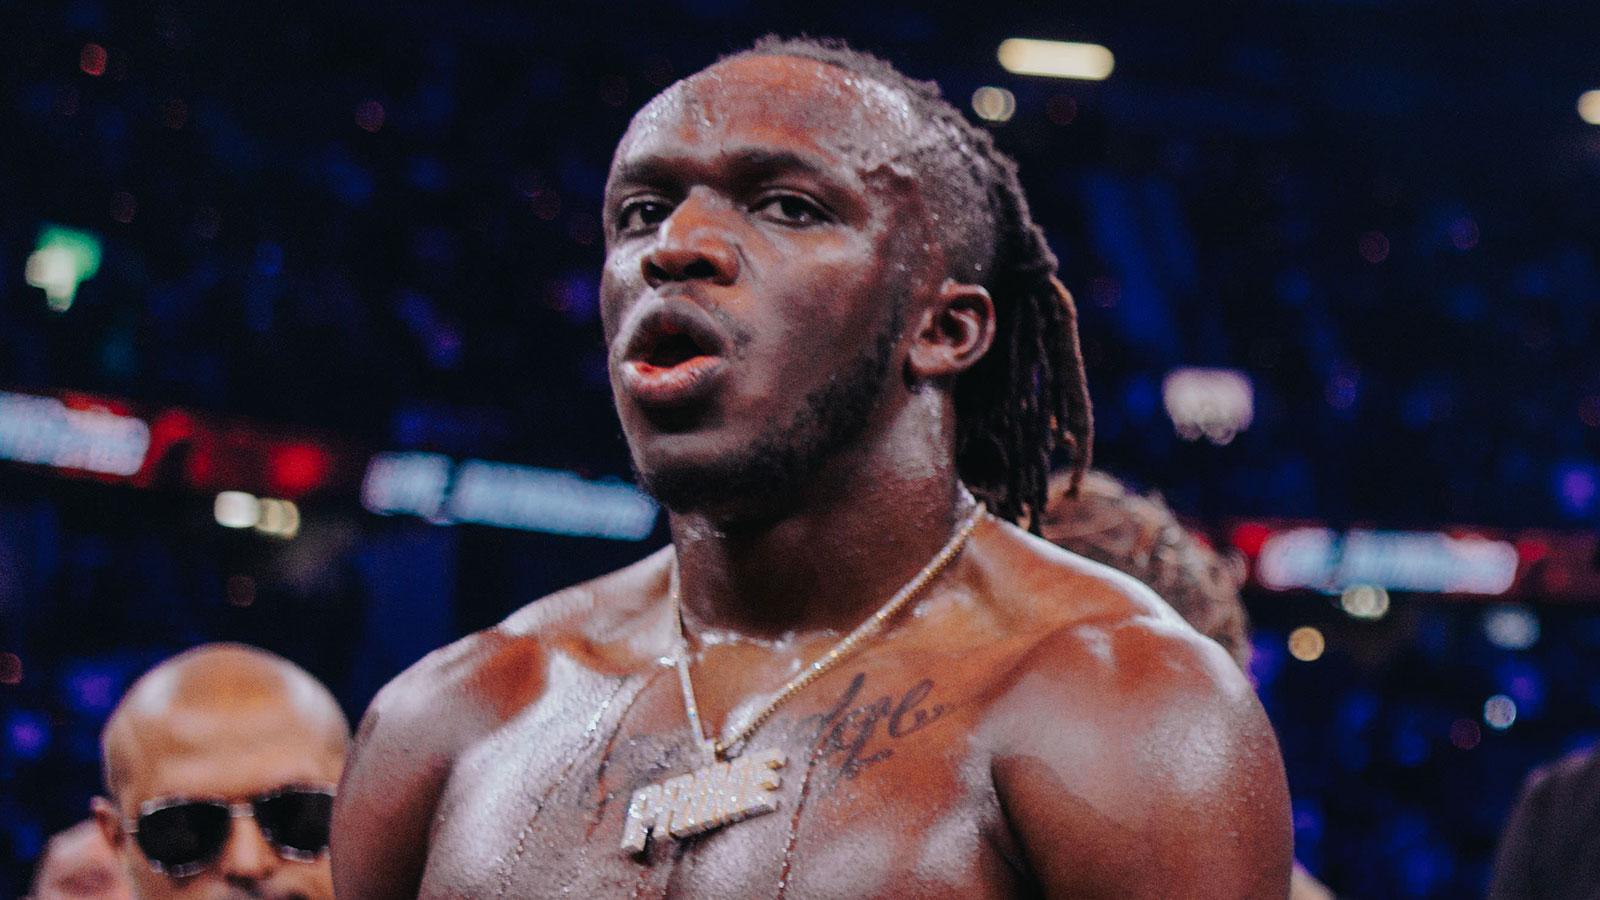 KSI wearing 'Prime' chain in boxing ring with Tommy Fury